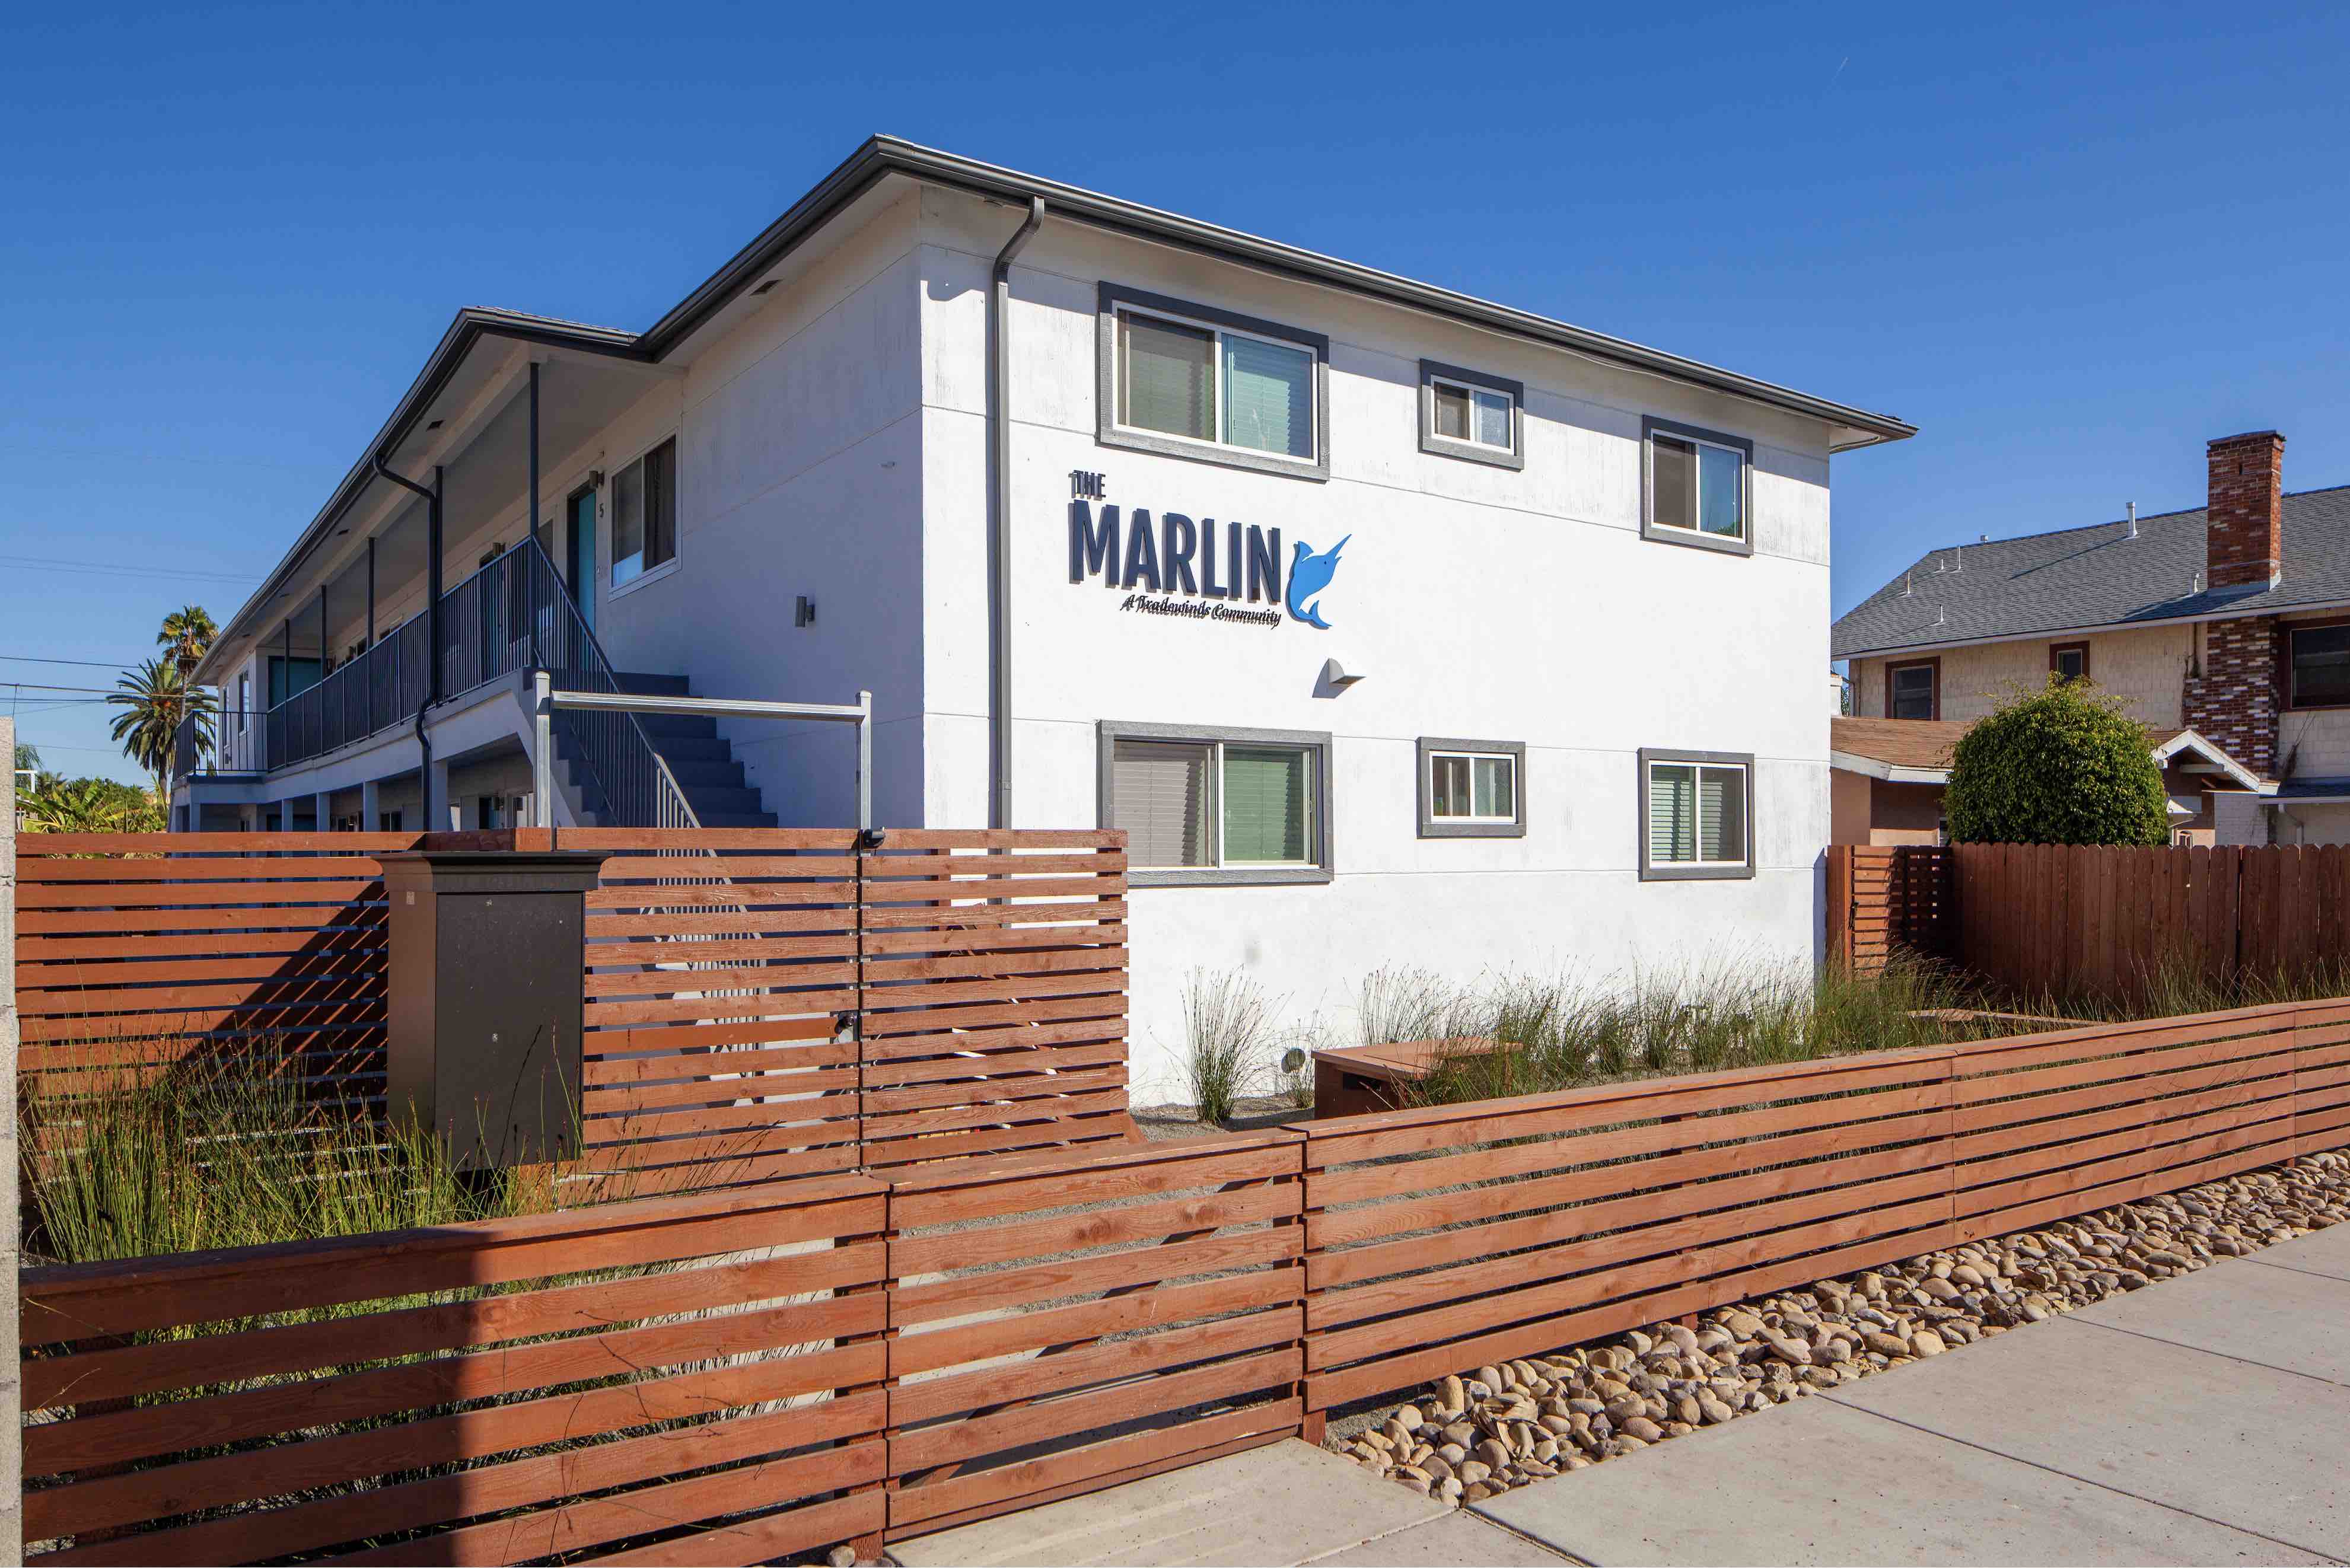 The Marlin complex in west City Heights was added to Sunrise Management’s portfolio